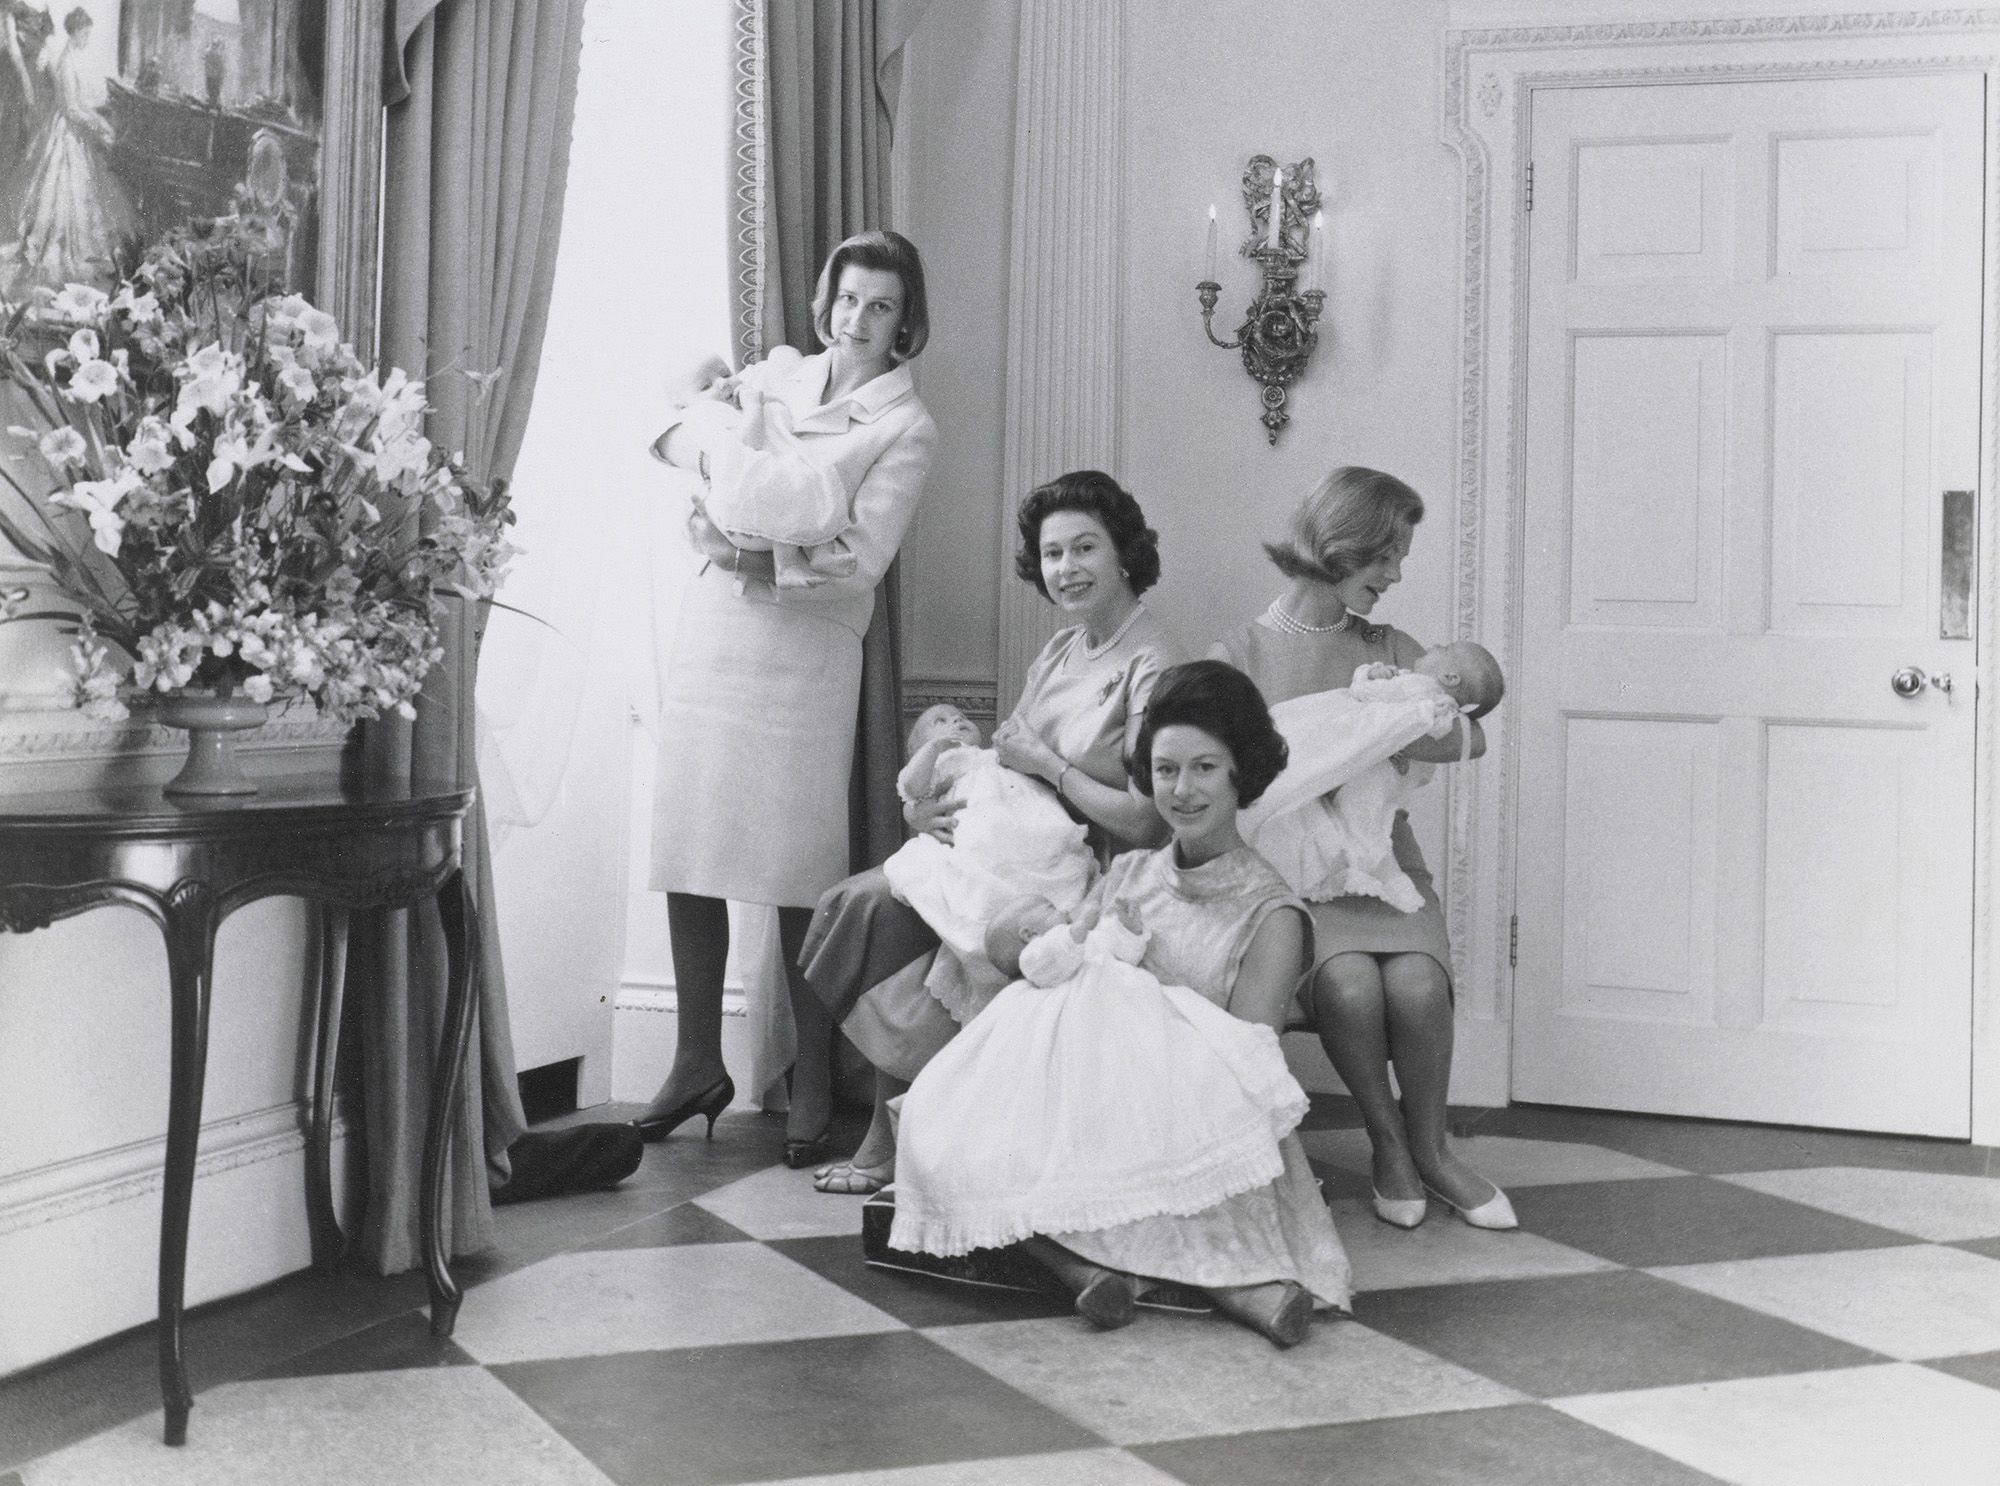 Princess Margaret asked her photographer husband to capture this picture of four royal mothers and their babies as a memento for the royal obstetrician who delivered the infants within two months of each other in 1964.